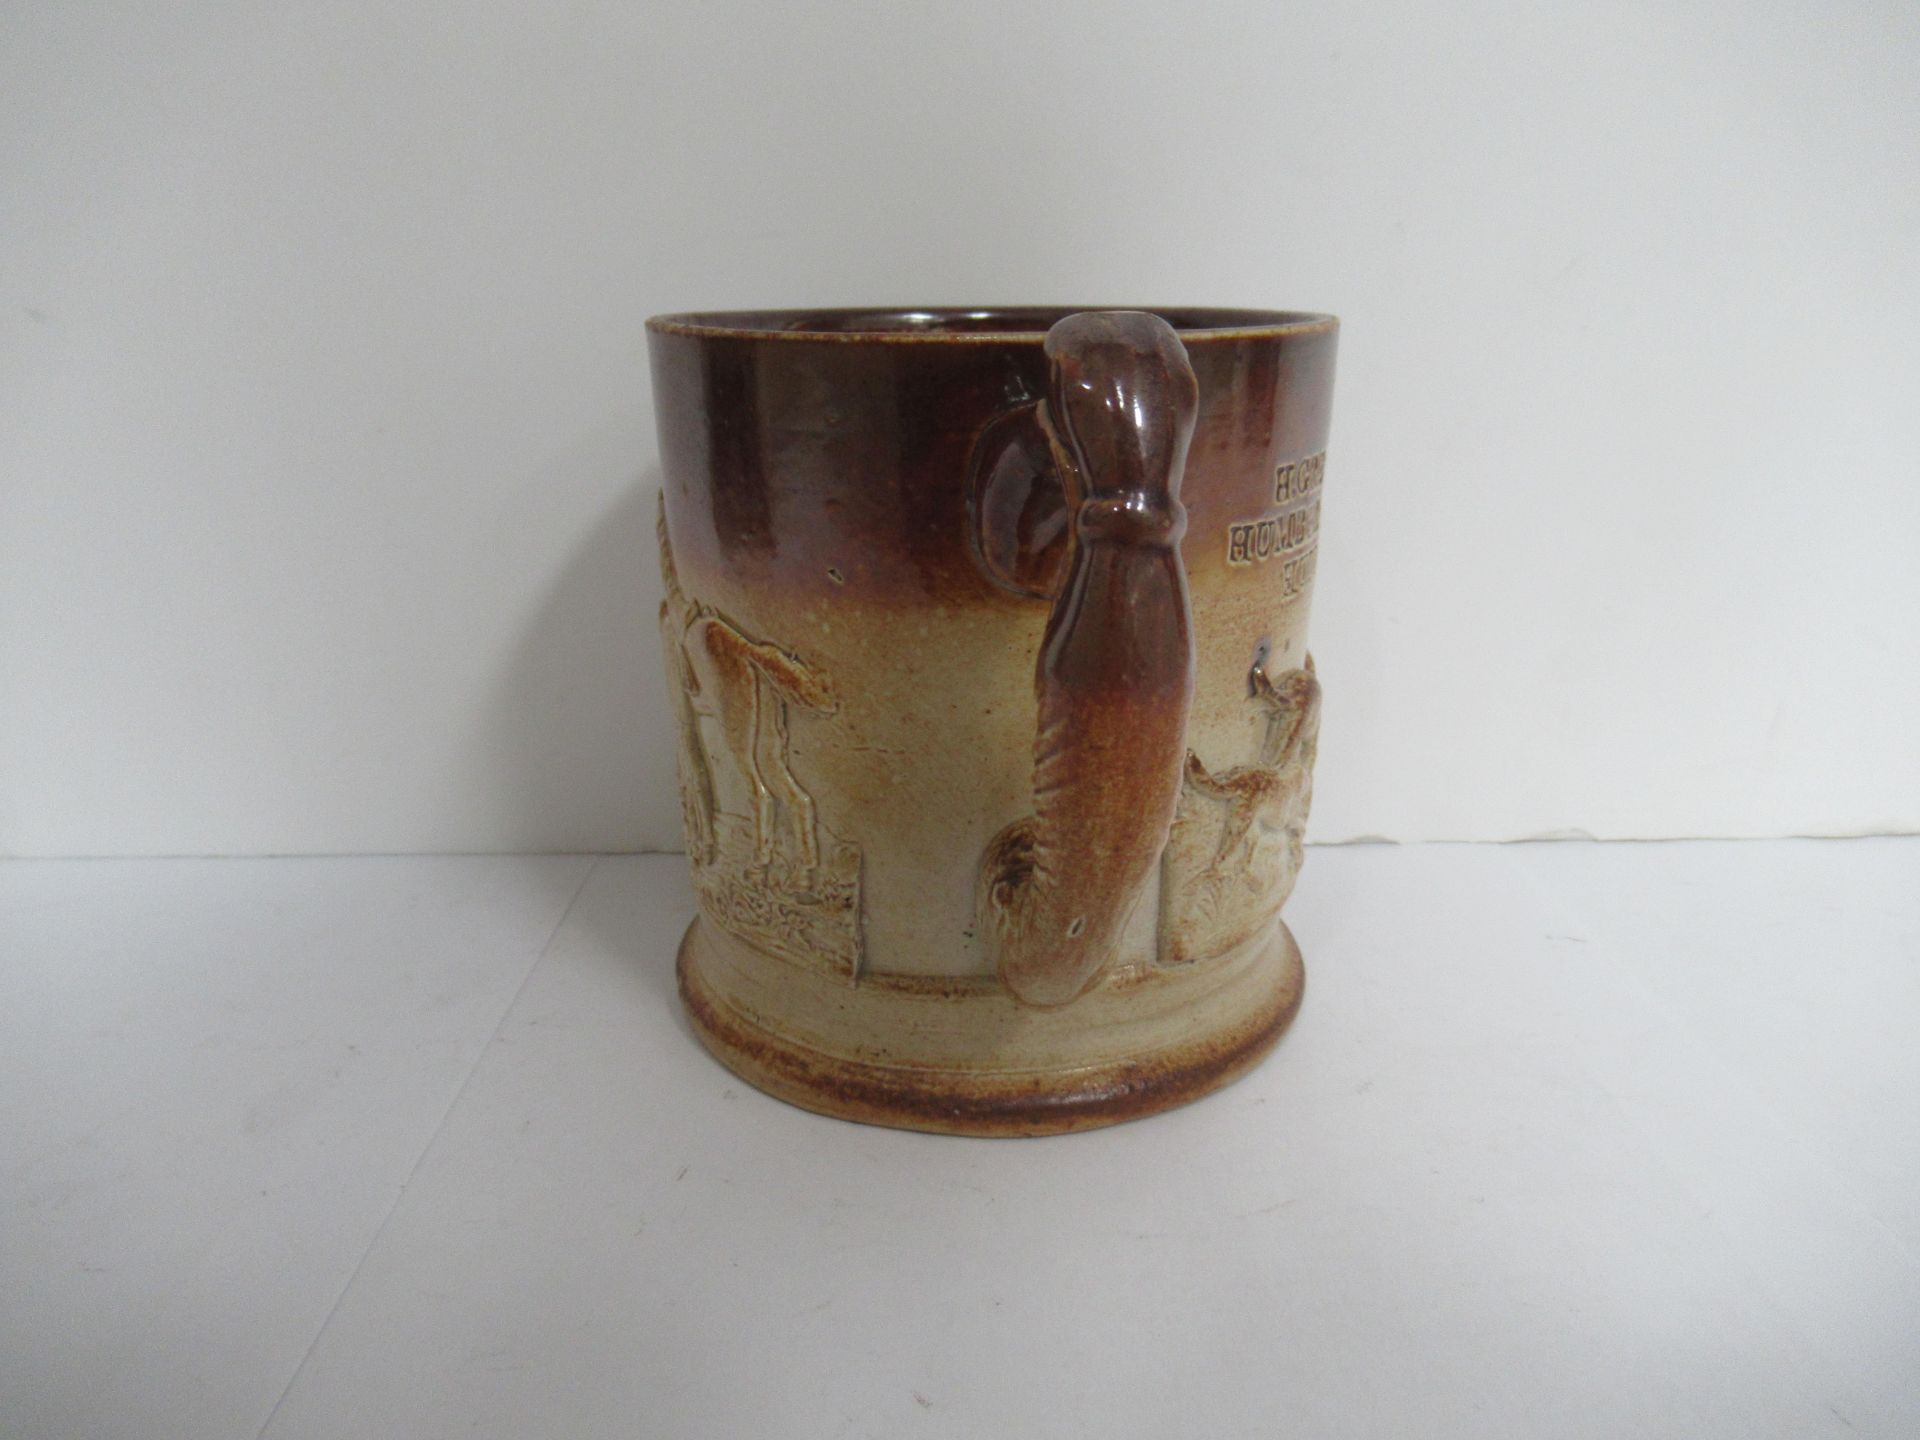 H.Green Humber Bank, Hull stone drinking vessel with greyhound handle - Image 4 of 7